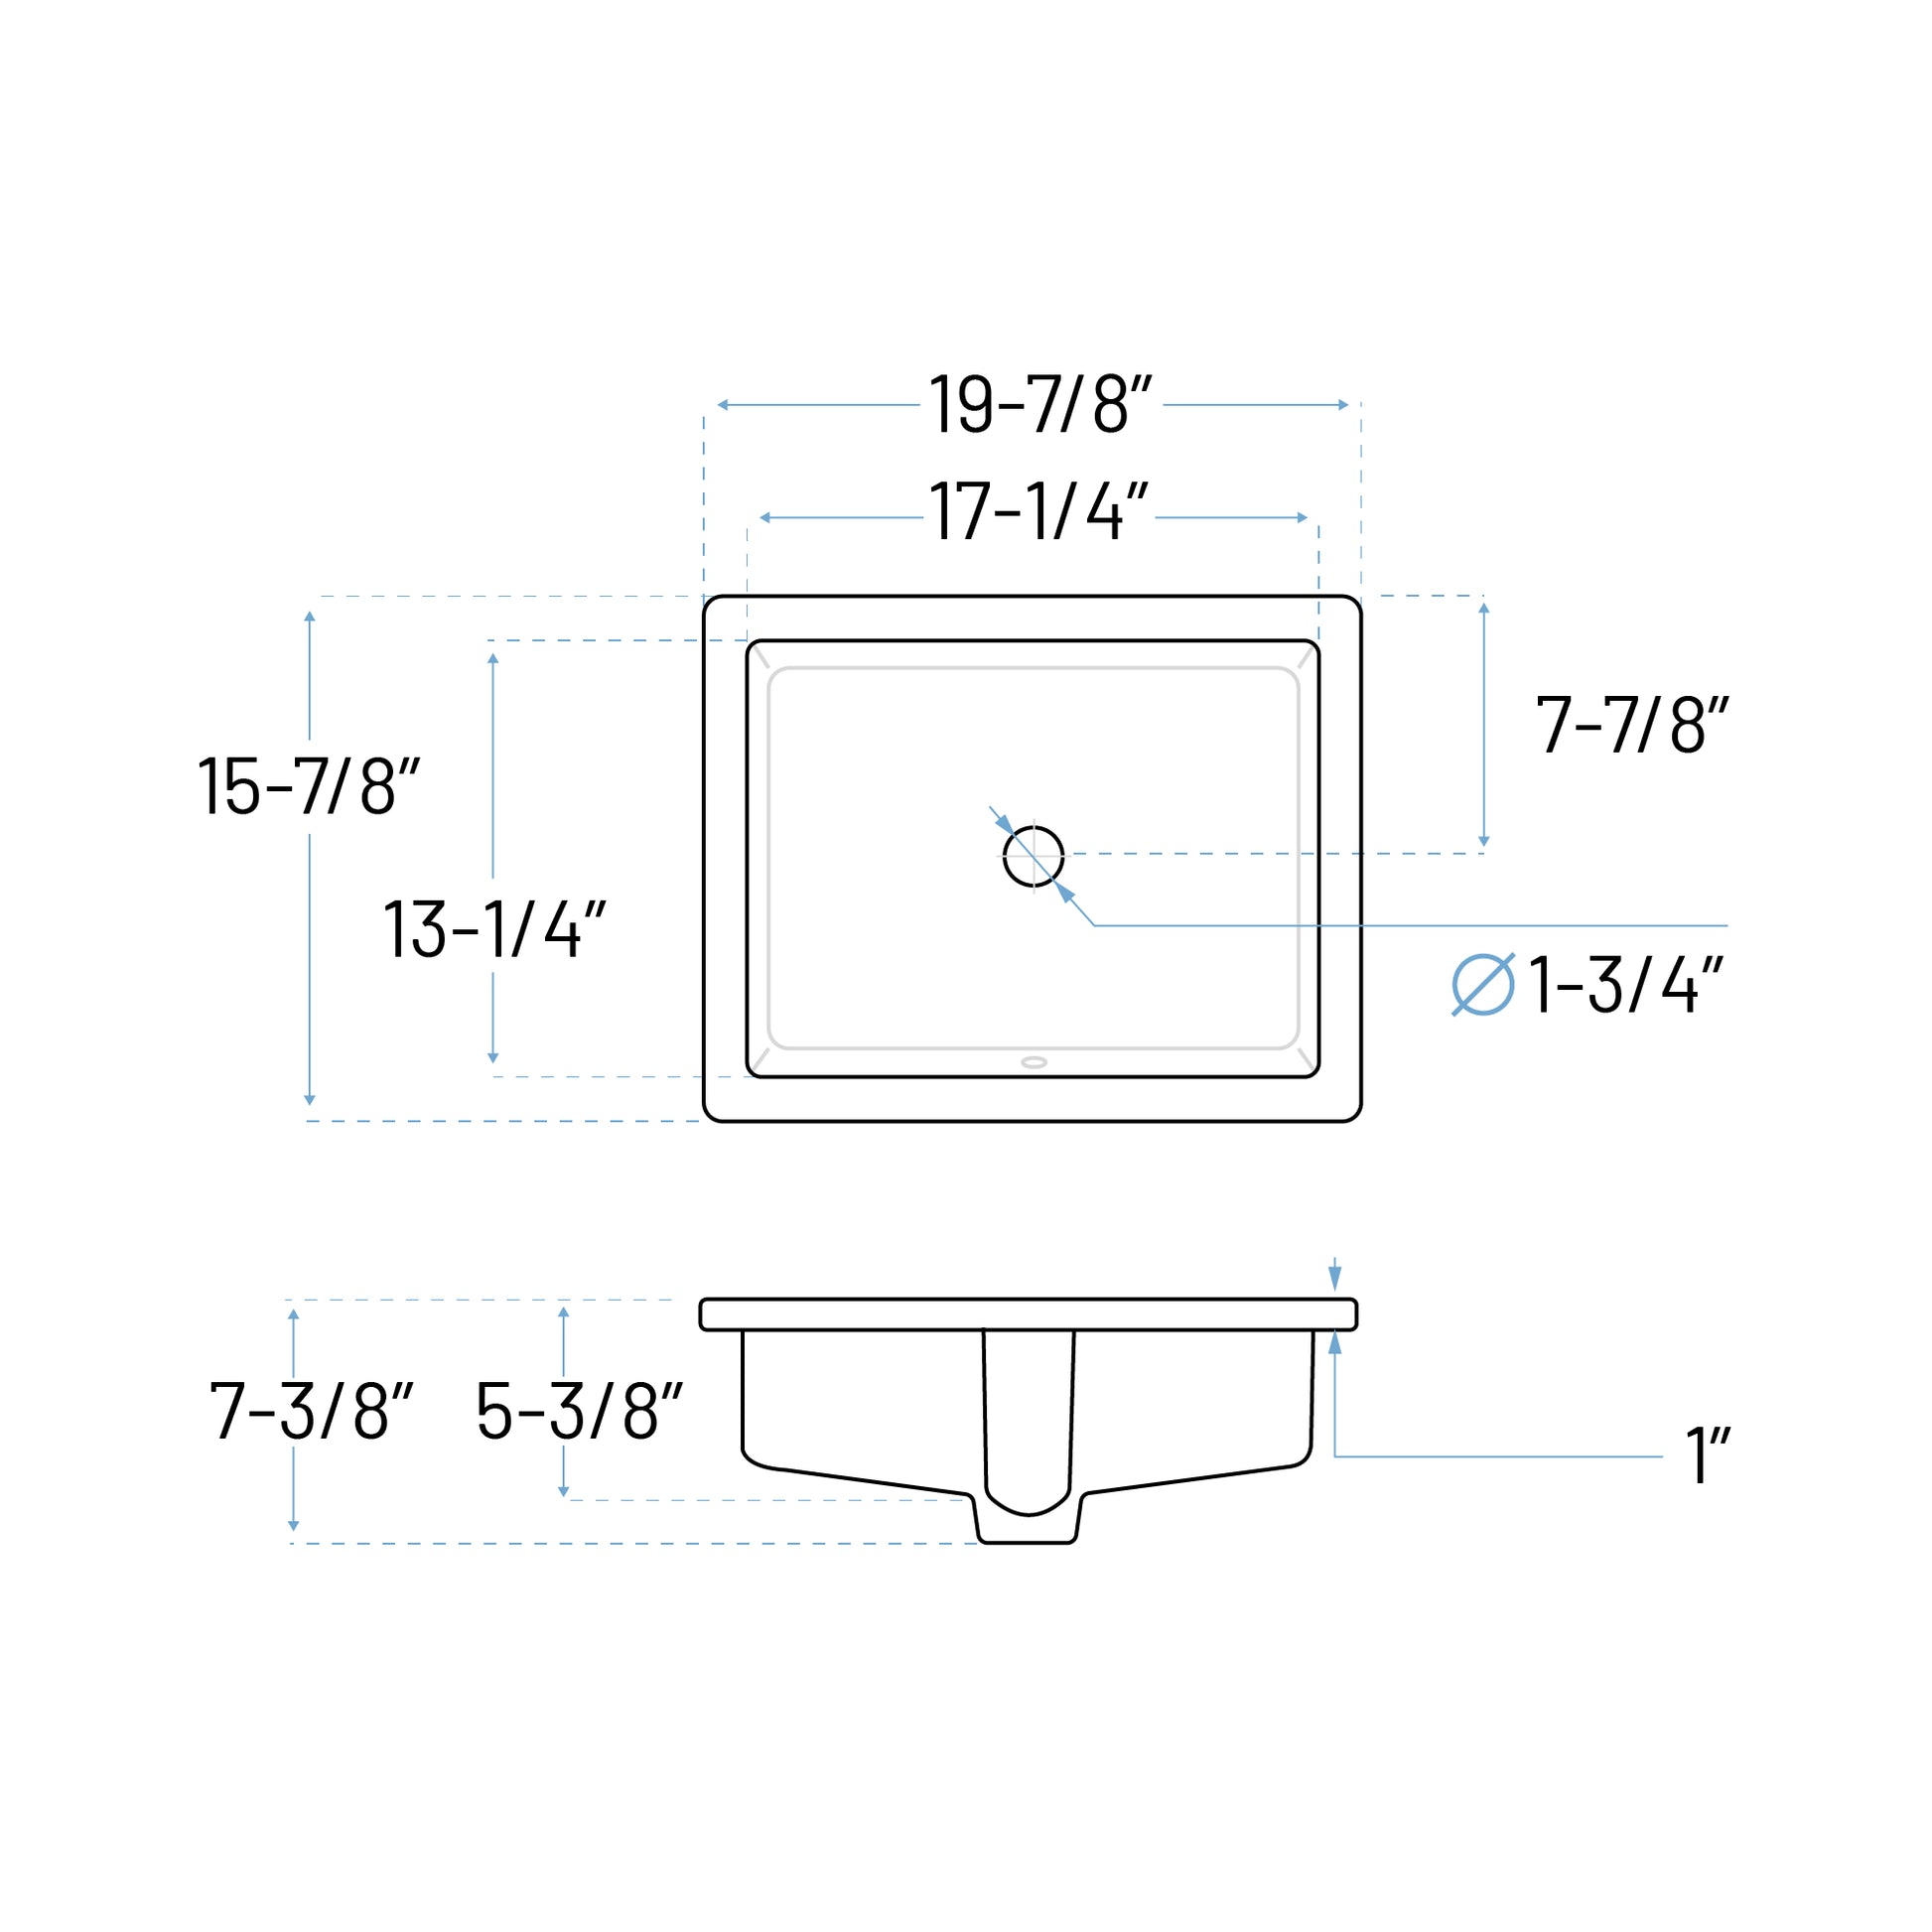 Technical Drawing of An undermount porcelain bathroom sink